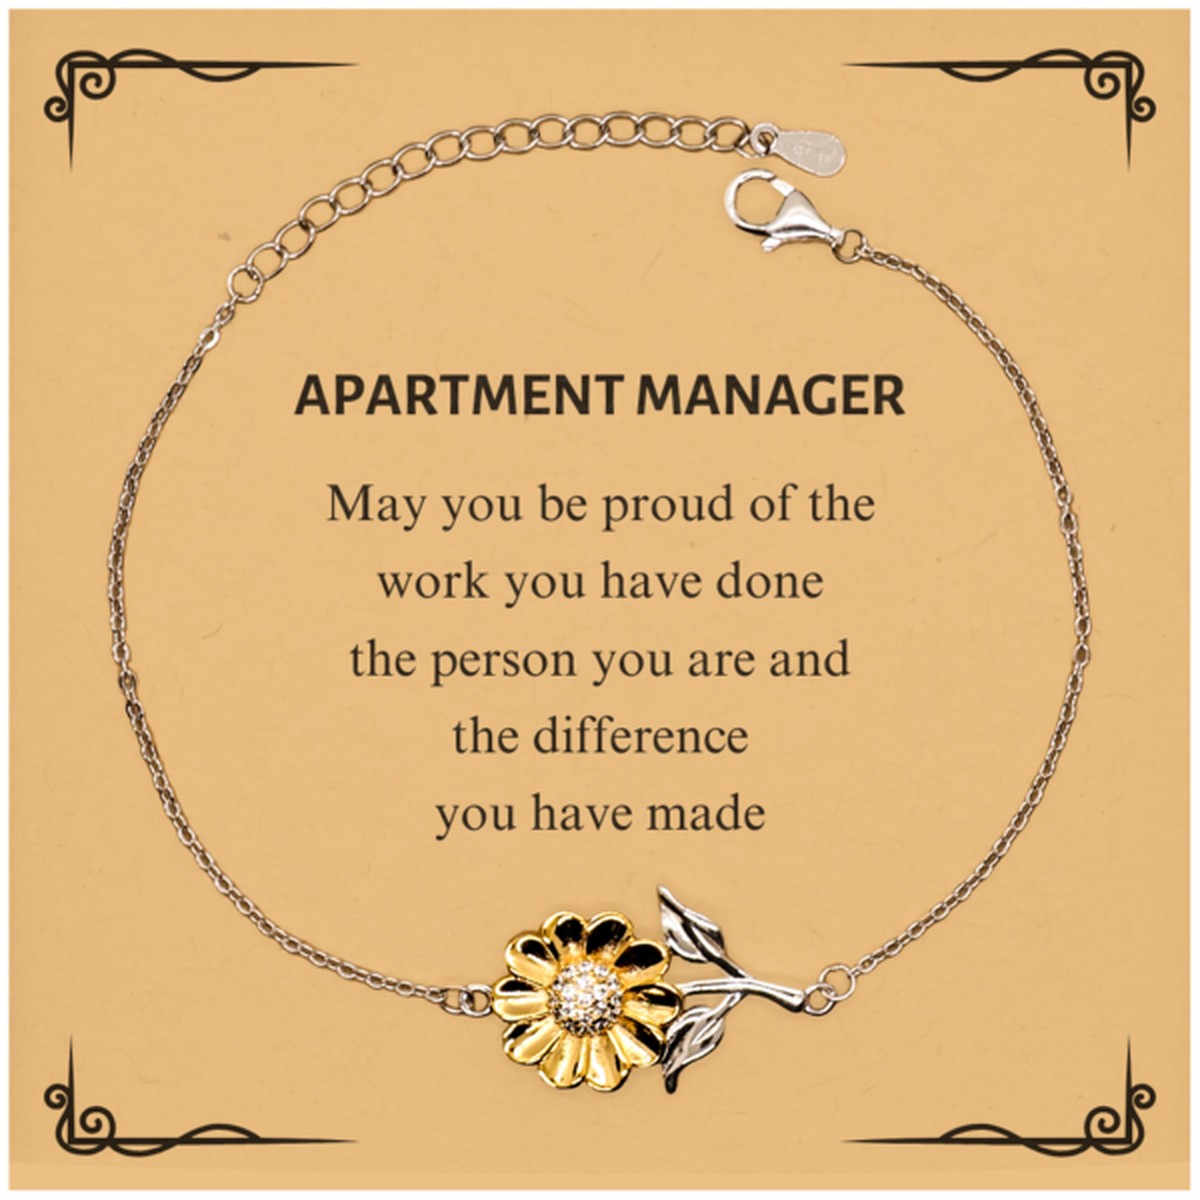 Apartment Manager May you be proud of the work you have done, Retirement Apartment Manager Sunflower Bracelet for Colleague Appreciation Gifts Amazing for Apartment Manager